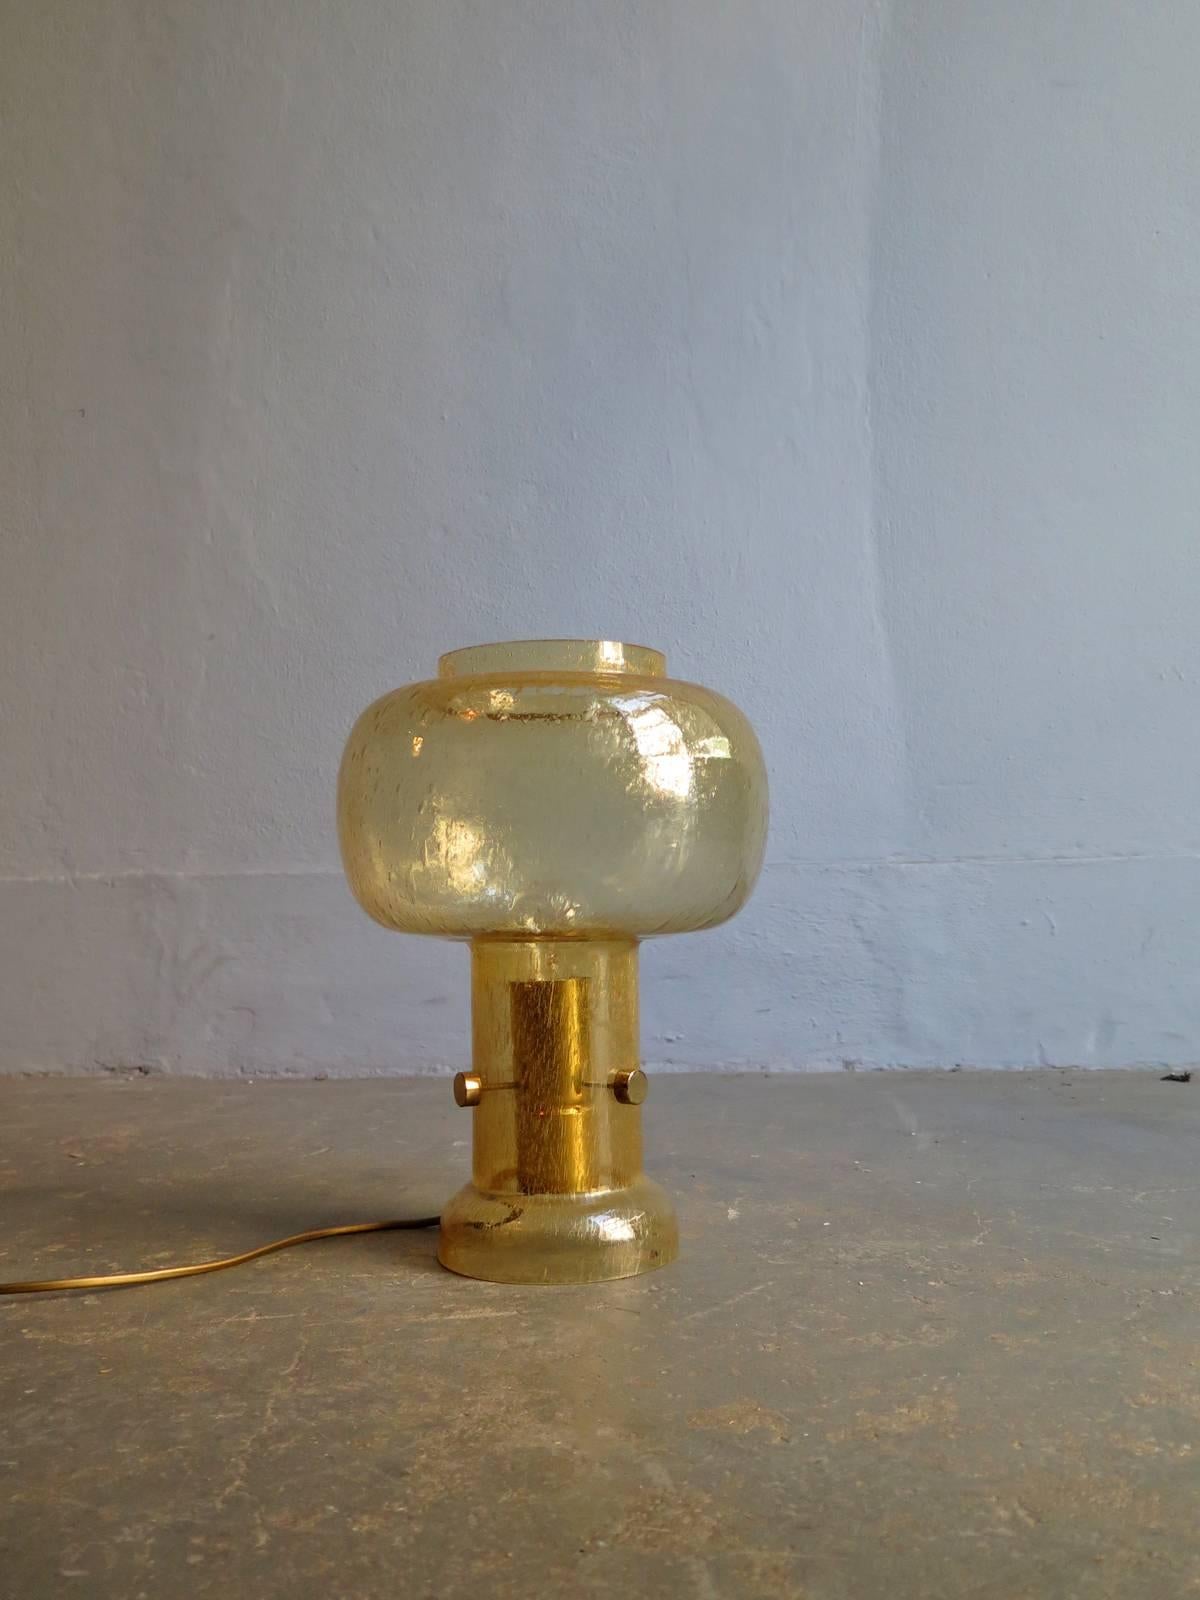 Bubbled golden glass table lamp.